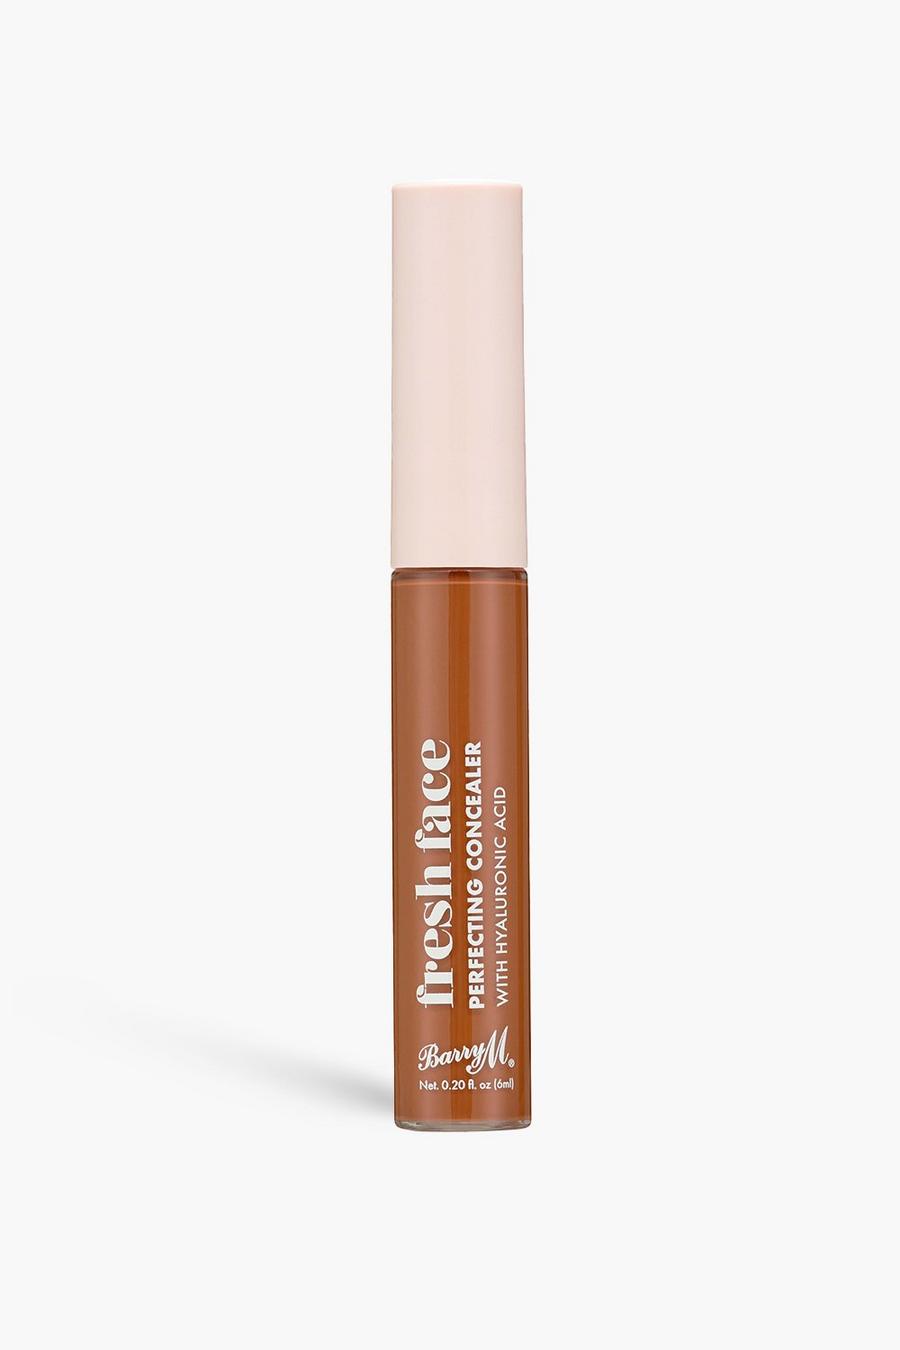 Barry M - Correttore Fresh Face Perfecting Concealer 17, Brown marrone